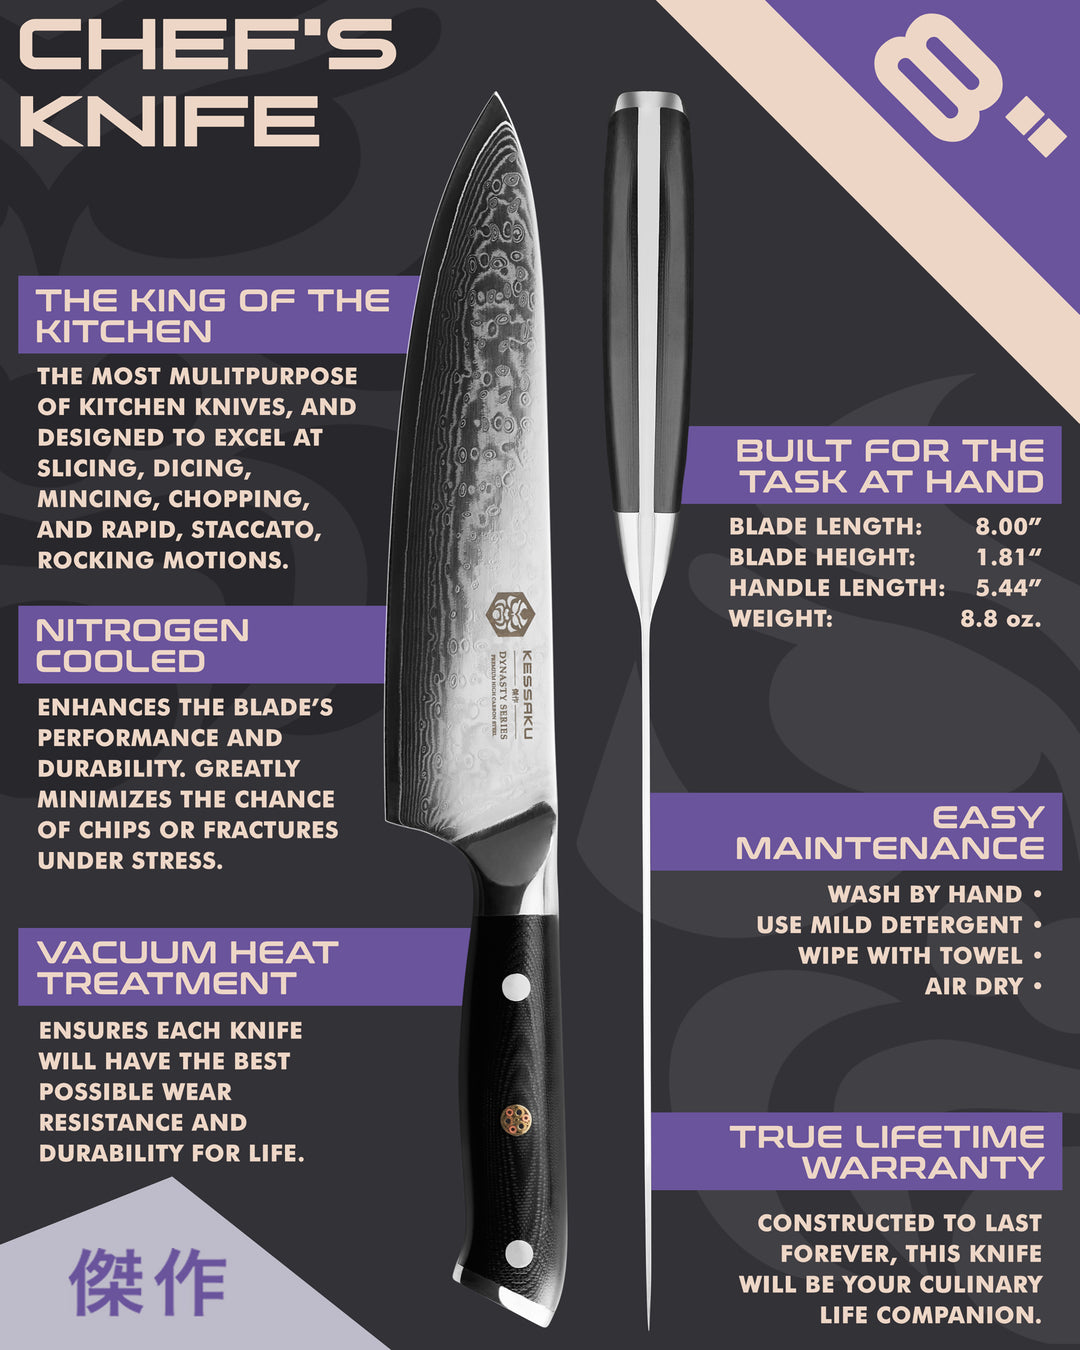 Kessaku Damascus 8-In. Chef's Knife uses, dimensions, maintenance, warranty info, and additional blade treatments